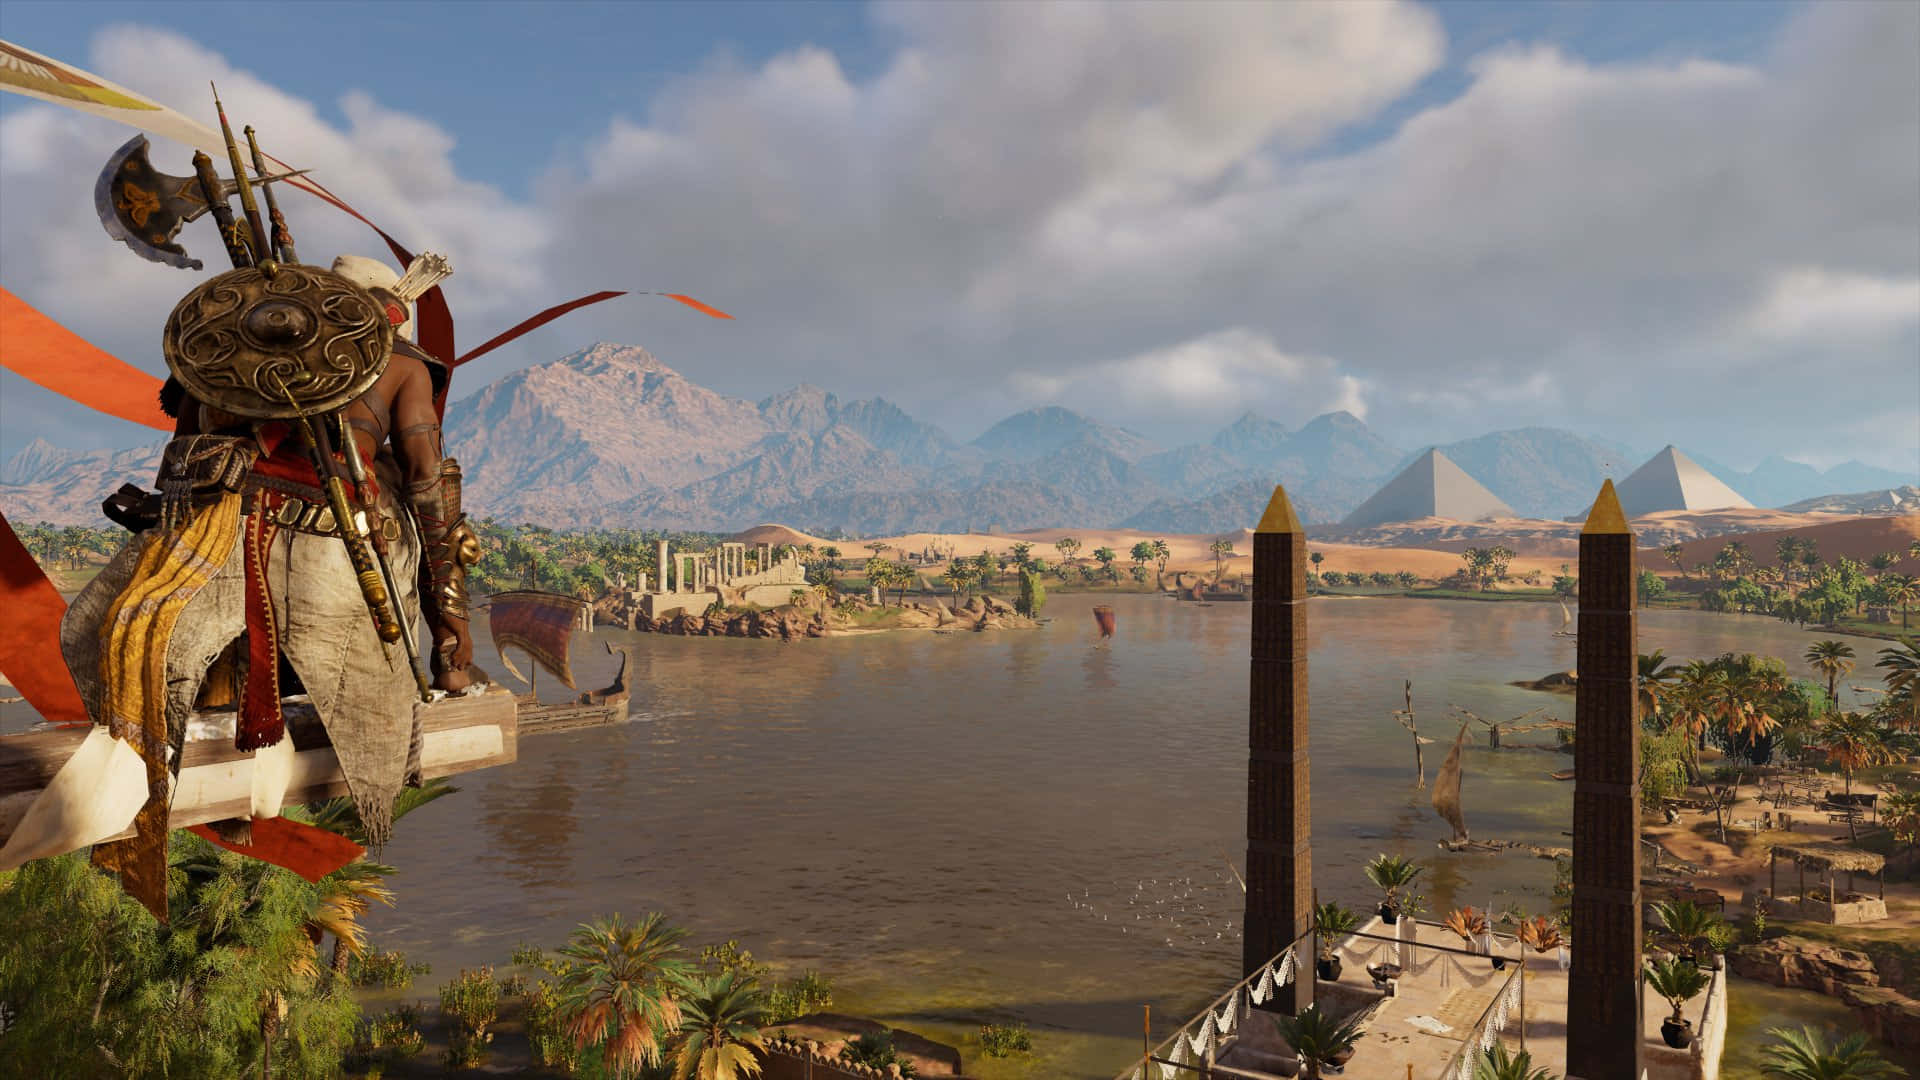 Experience Ancient Egypt in the award winning game Assassin's Creed Origins